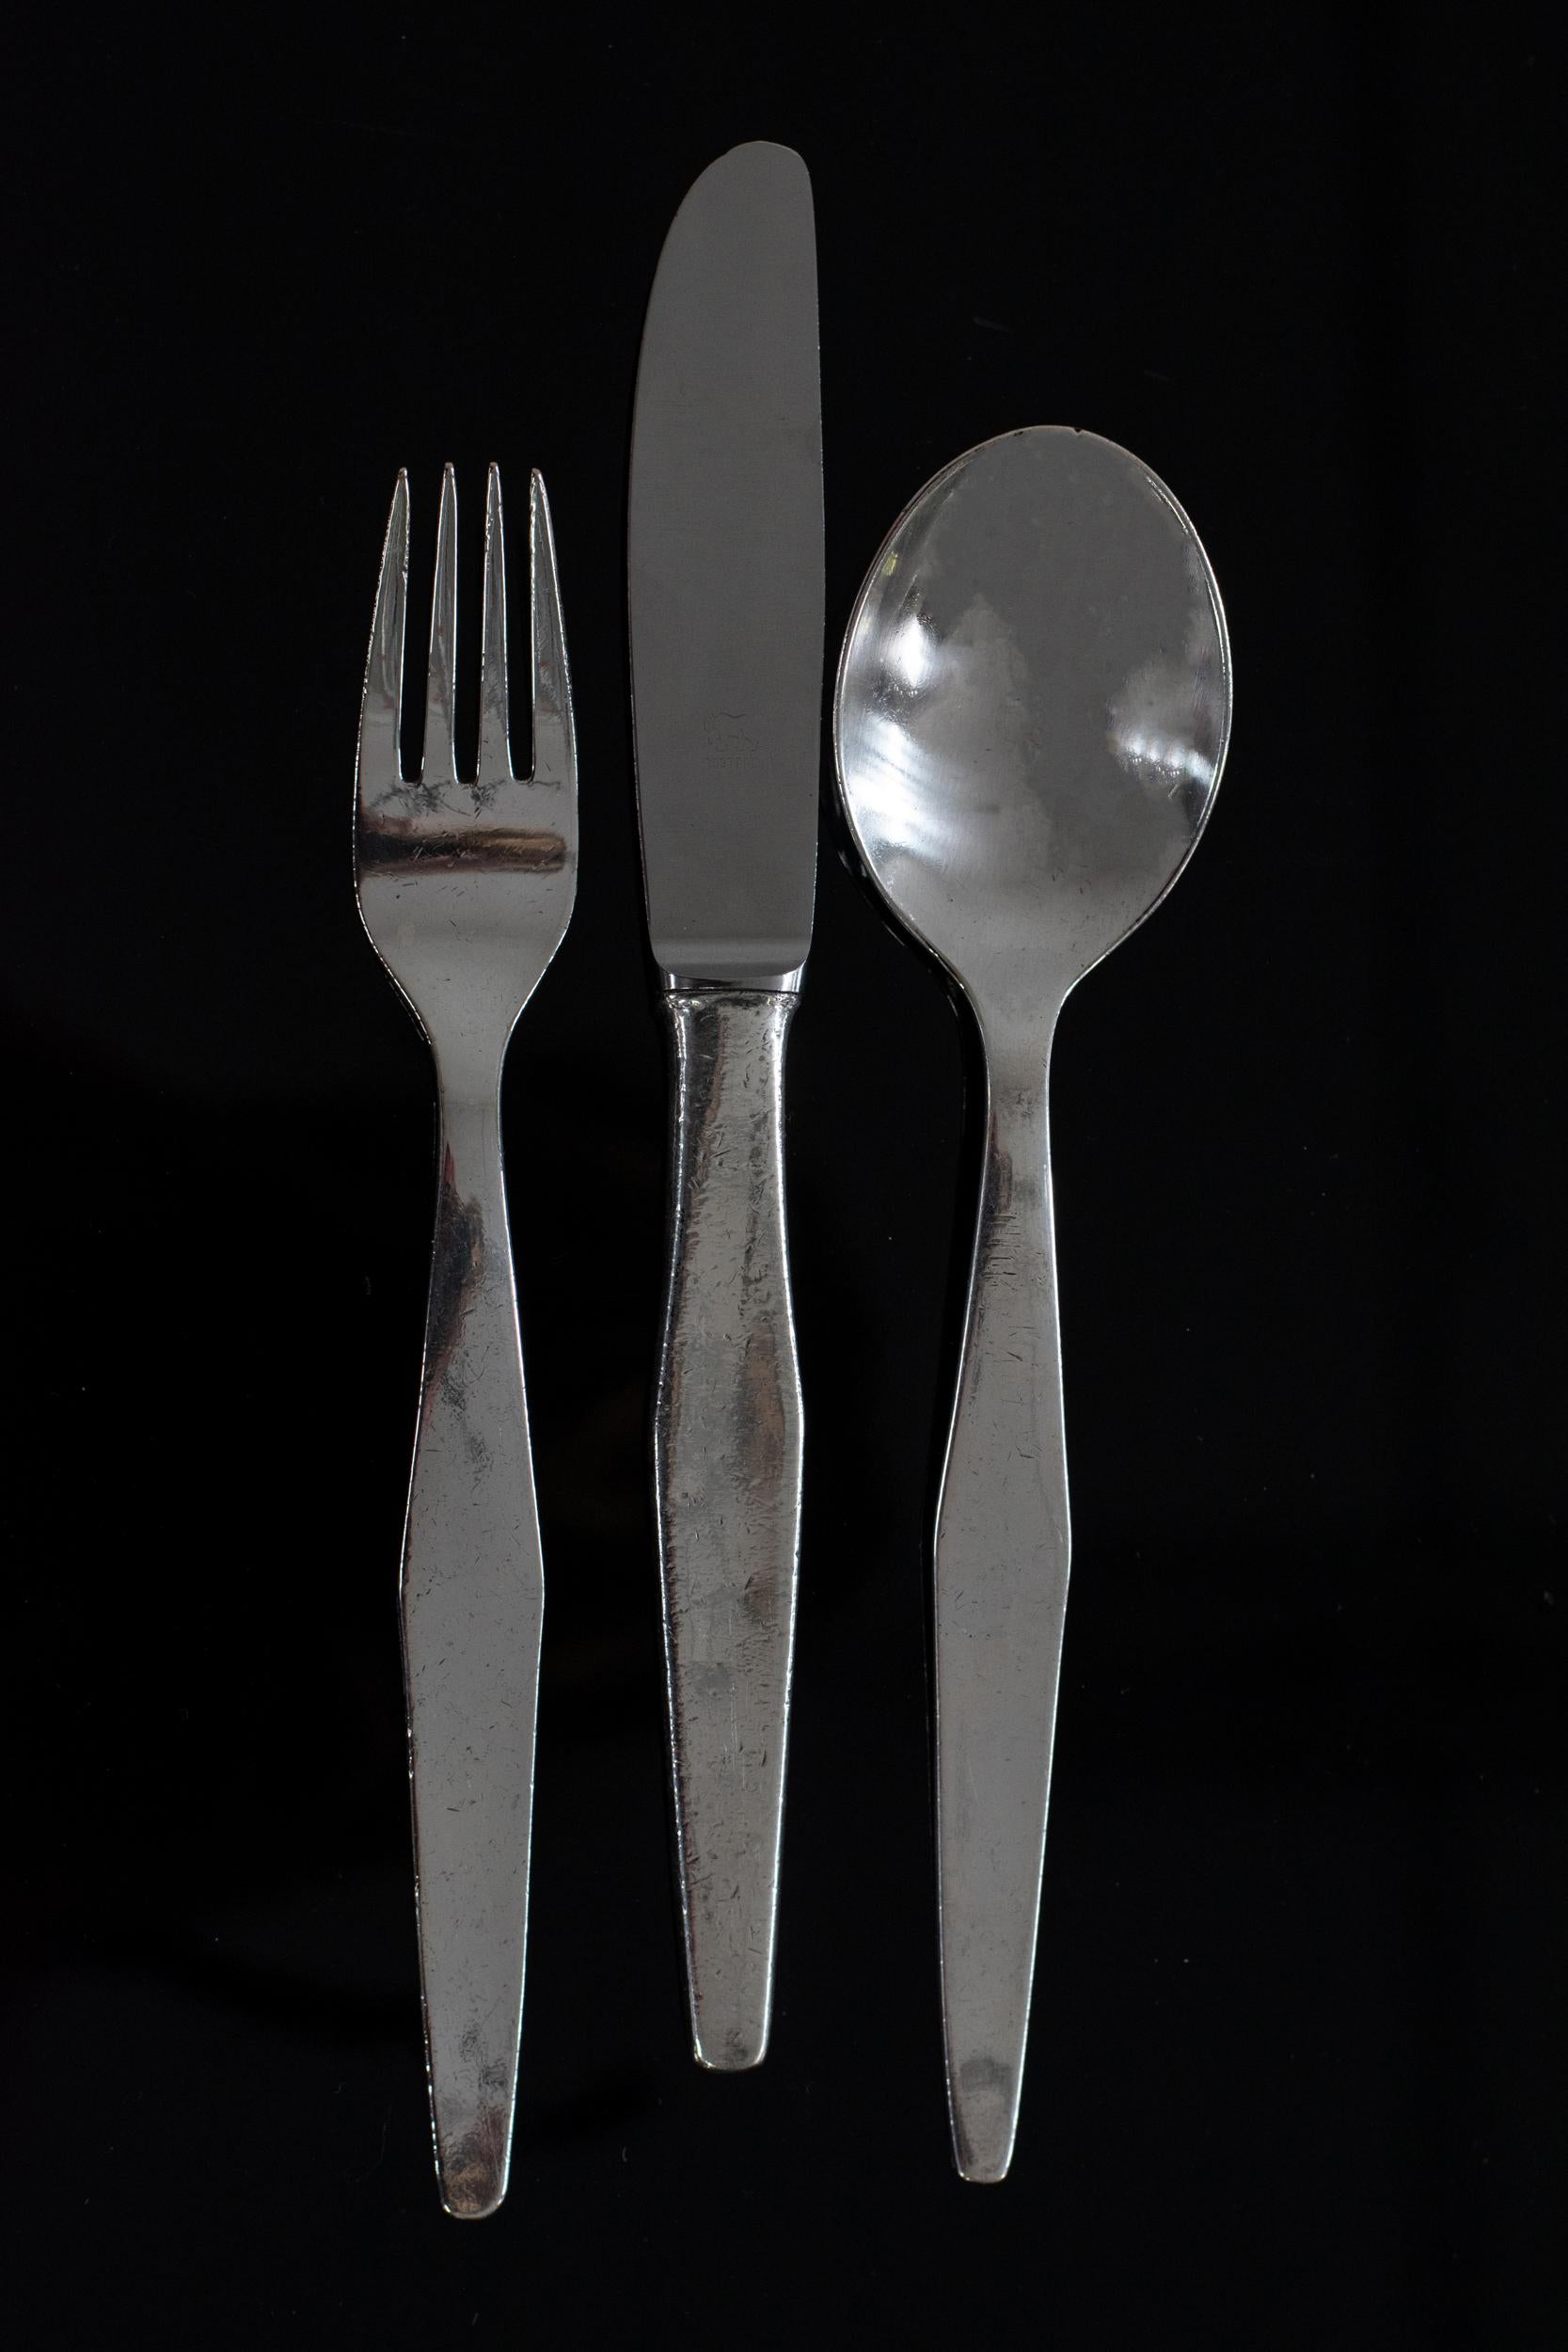 Silvered Gio Ponti Cutlery Set for Six in Nickel Silver by Krupp Italy 1950s For Sale